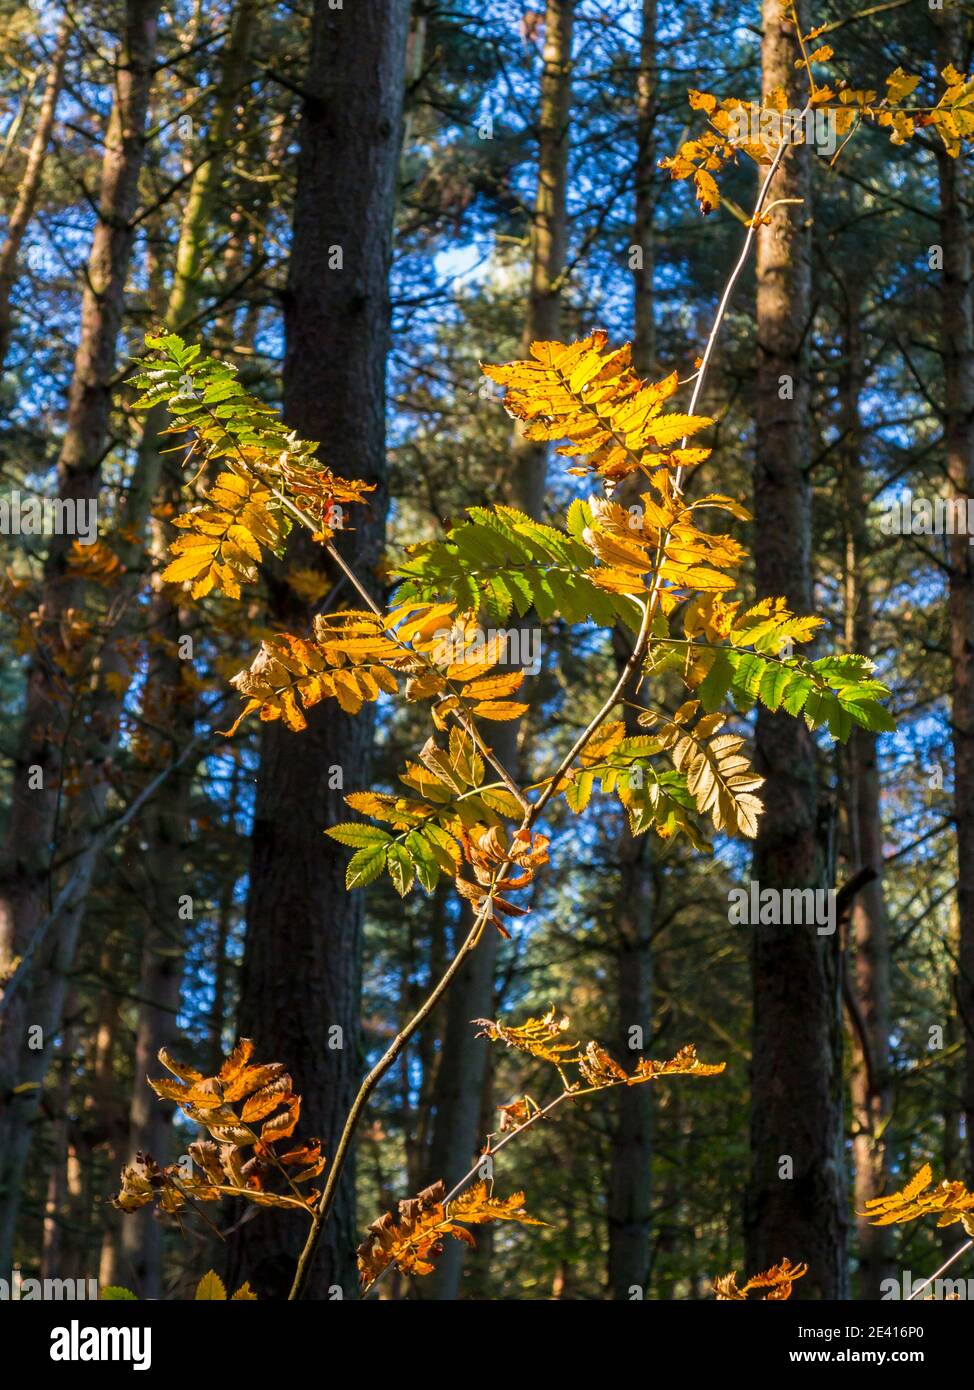 Sunlit leaves in autumn with forest of pine trees in background. Stock Photo